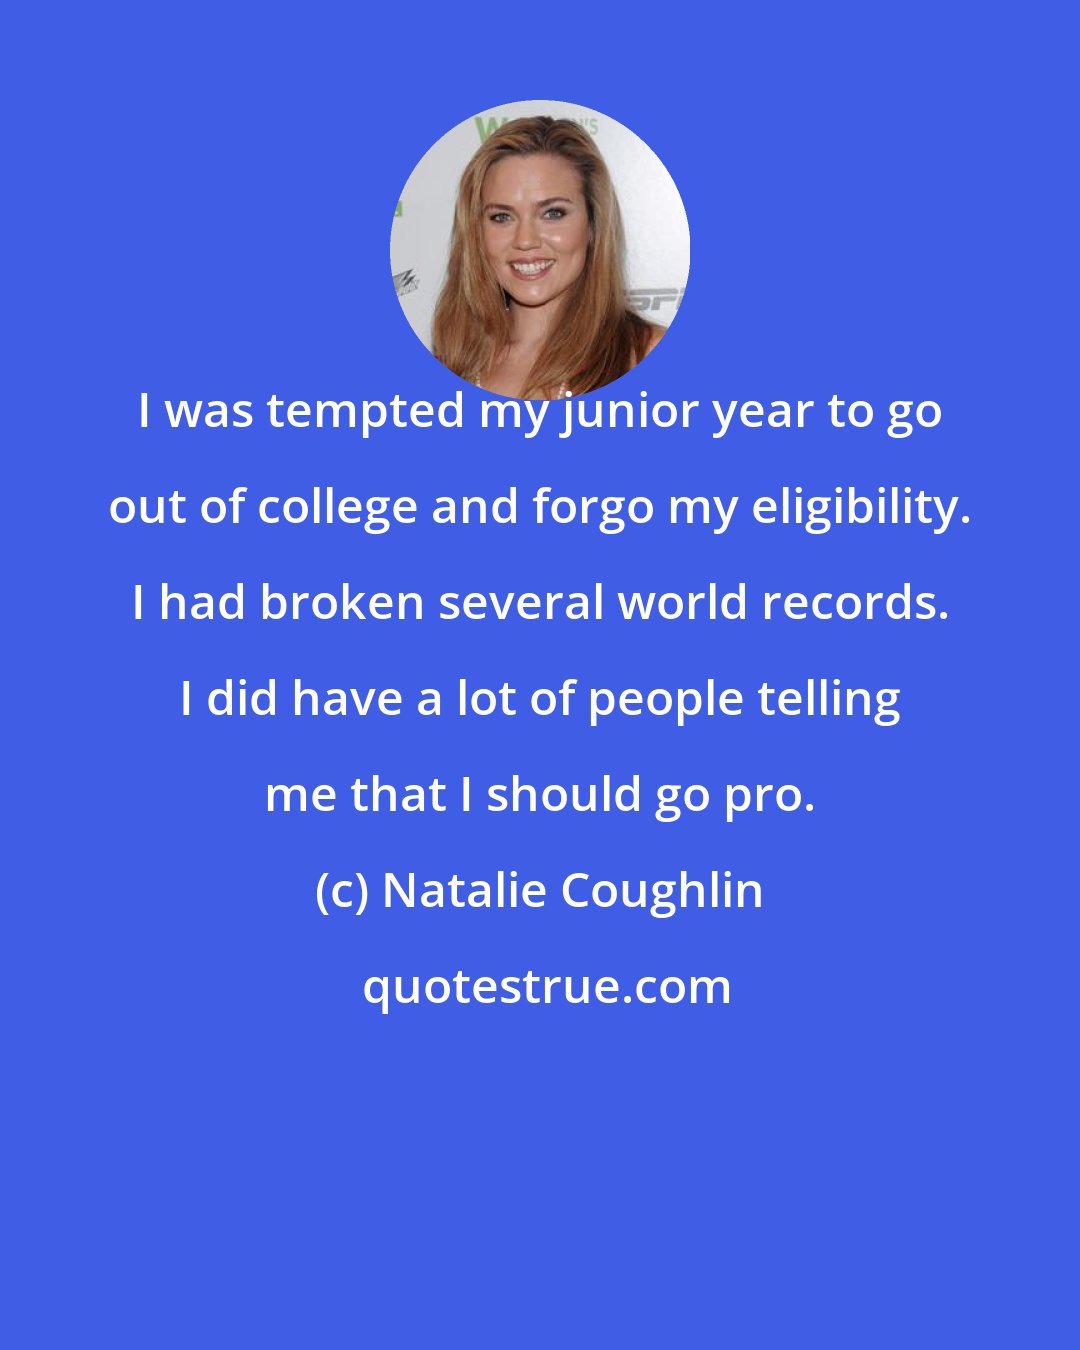 Natalie Coughlin: I was tempted my junior year to go out of college and forgo my eligibility. I had broken several world records. I did have a lot of people telling me that I should go pro.